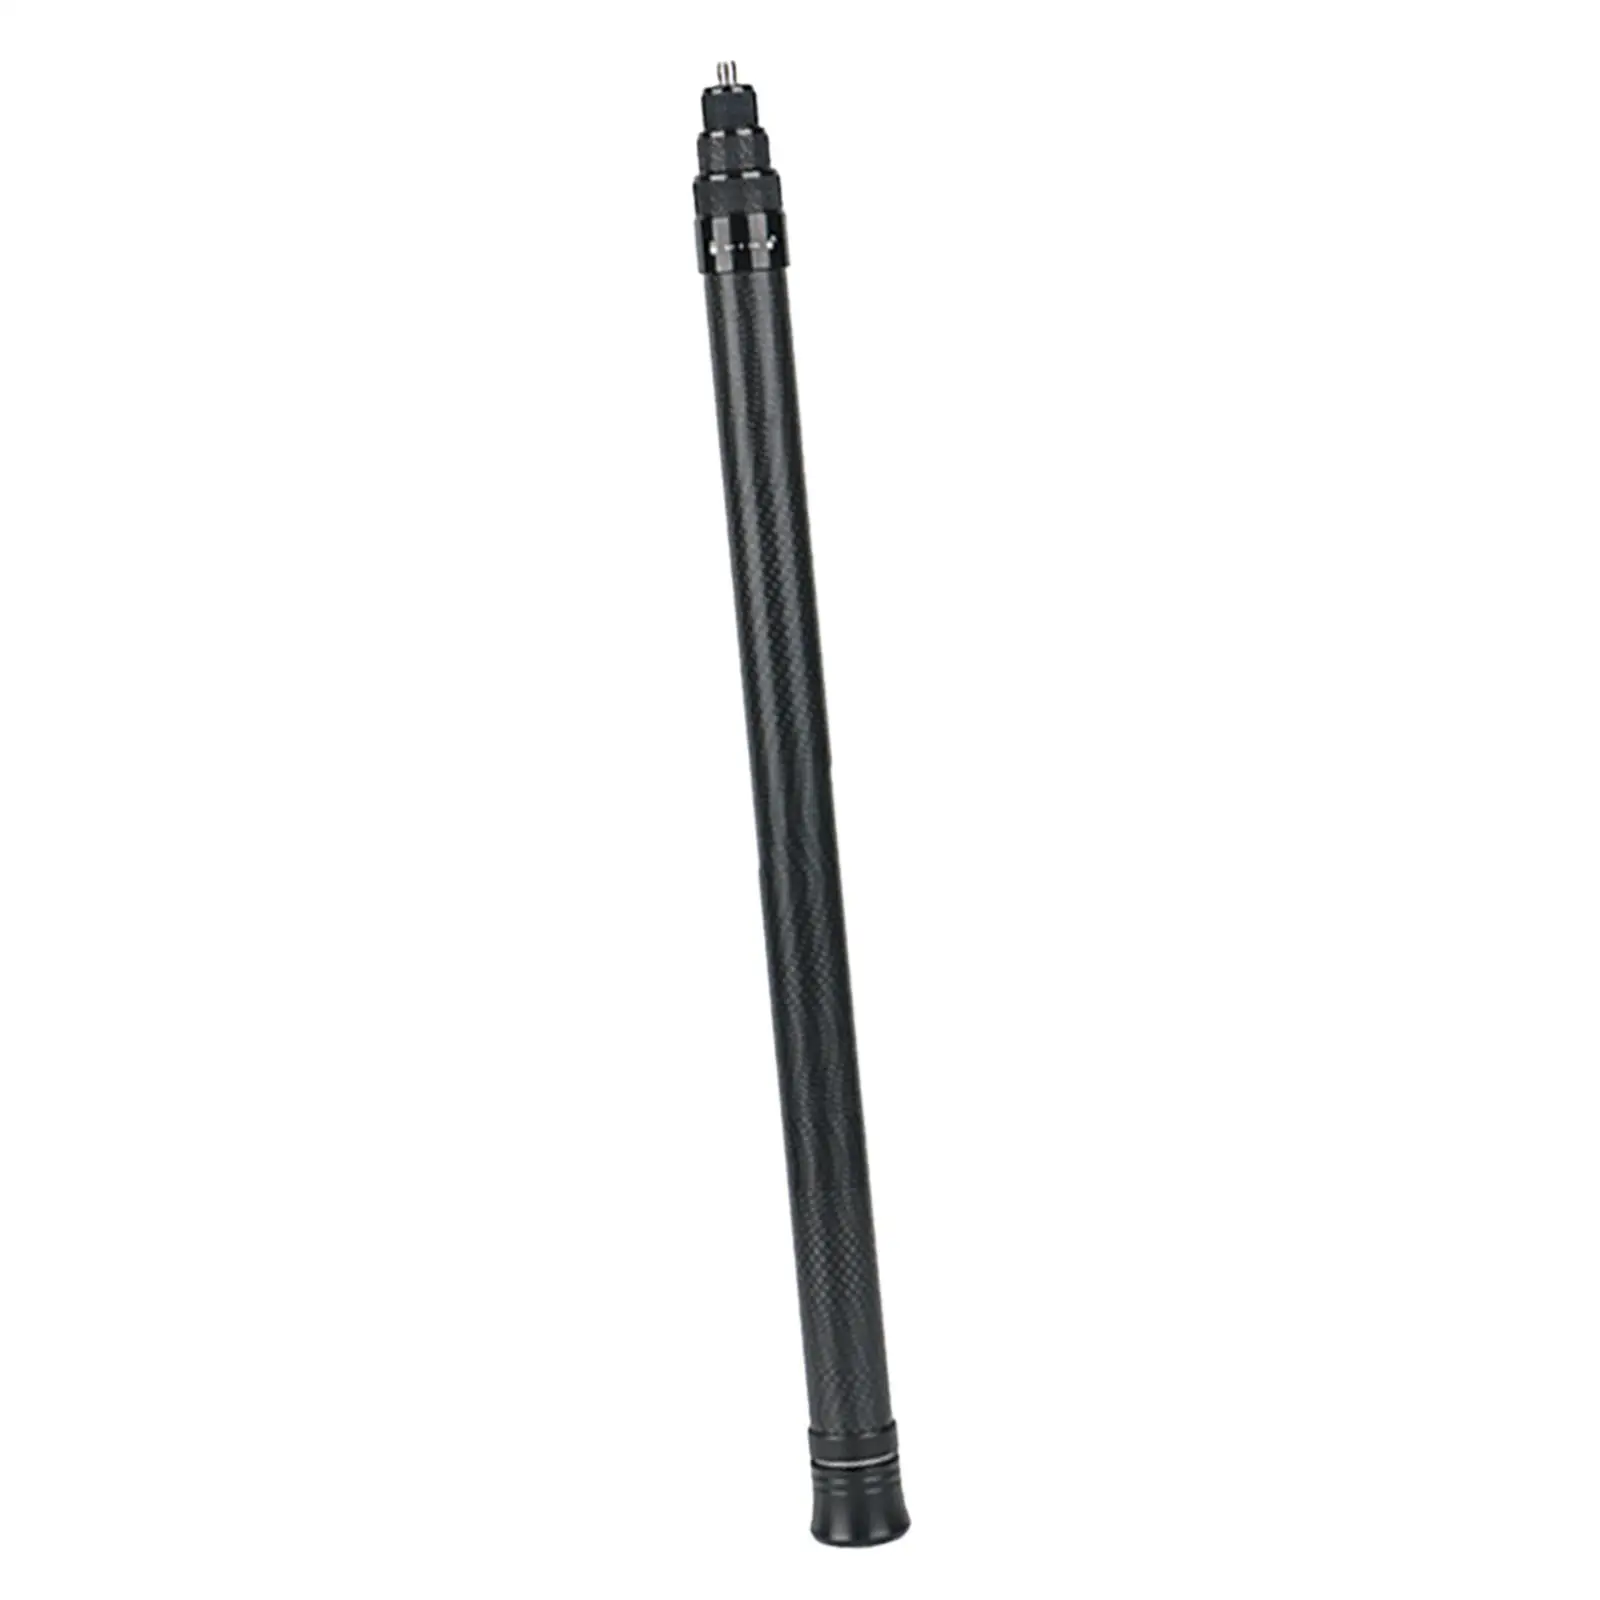 Selfie Stick Pole Strong Load Bearing Accessories Firmly Connected Carbon Fiber Monopod Lengths Extension for Outdoor Activities